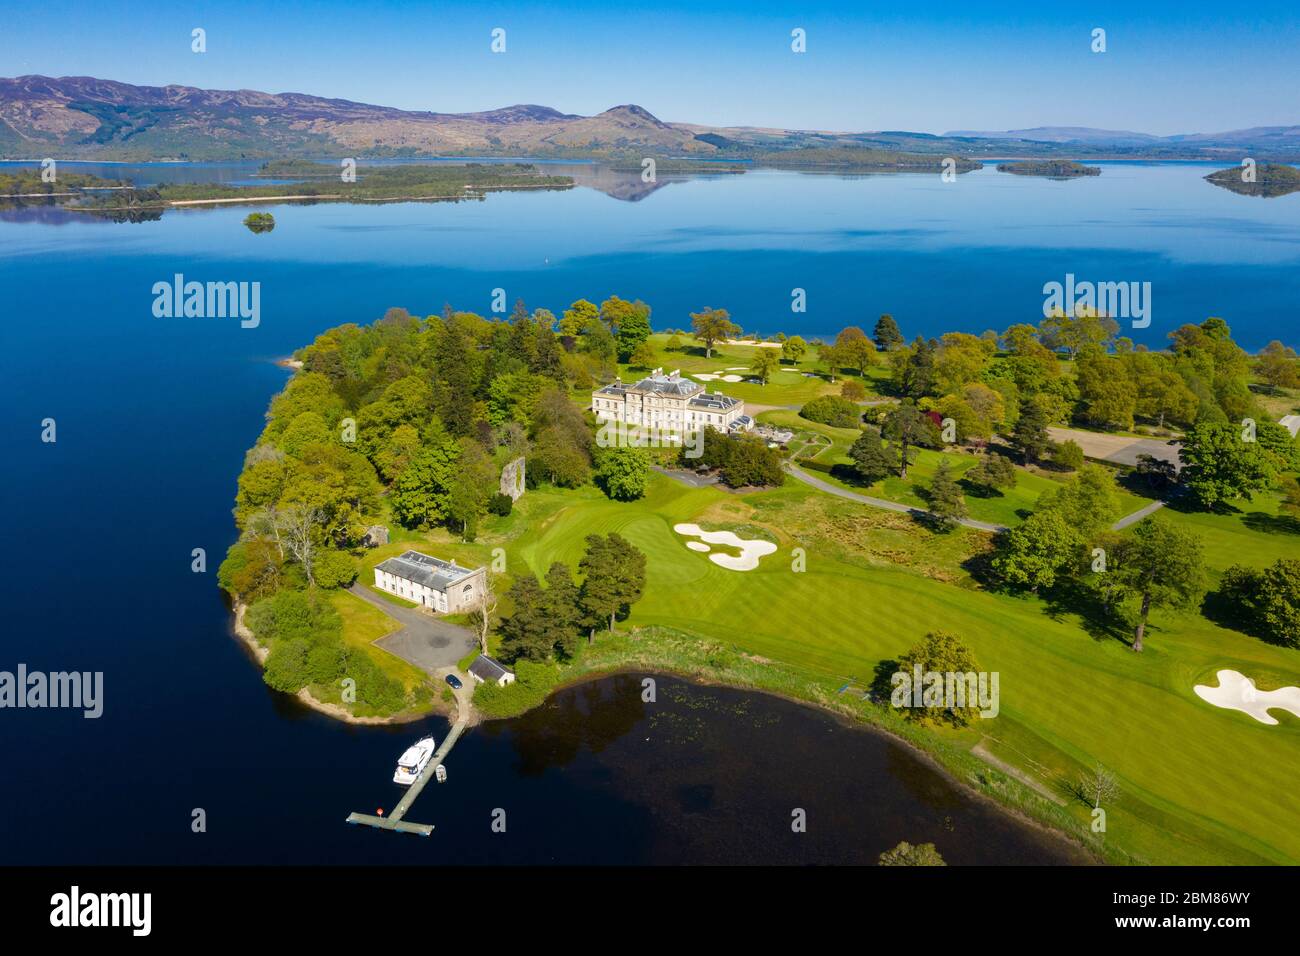 Aerial view of Loch Lomond Golf Club on shores of Loch Lomond, closed during Covid-19 lockdown, Argyll and Bute, Scotland, UK Stock Photo